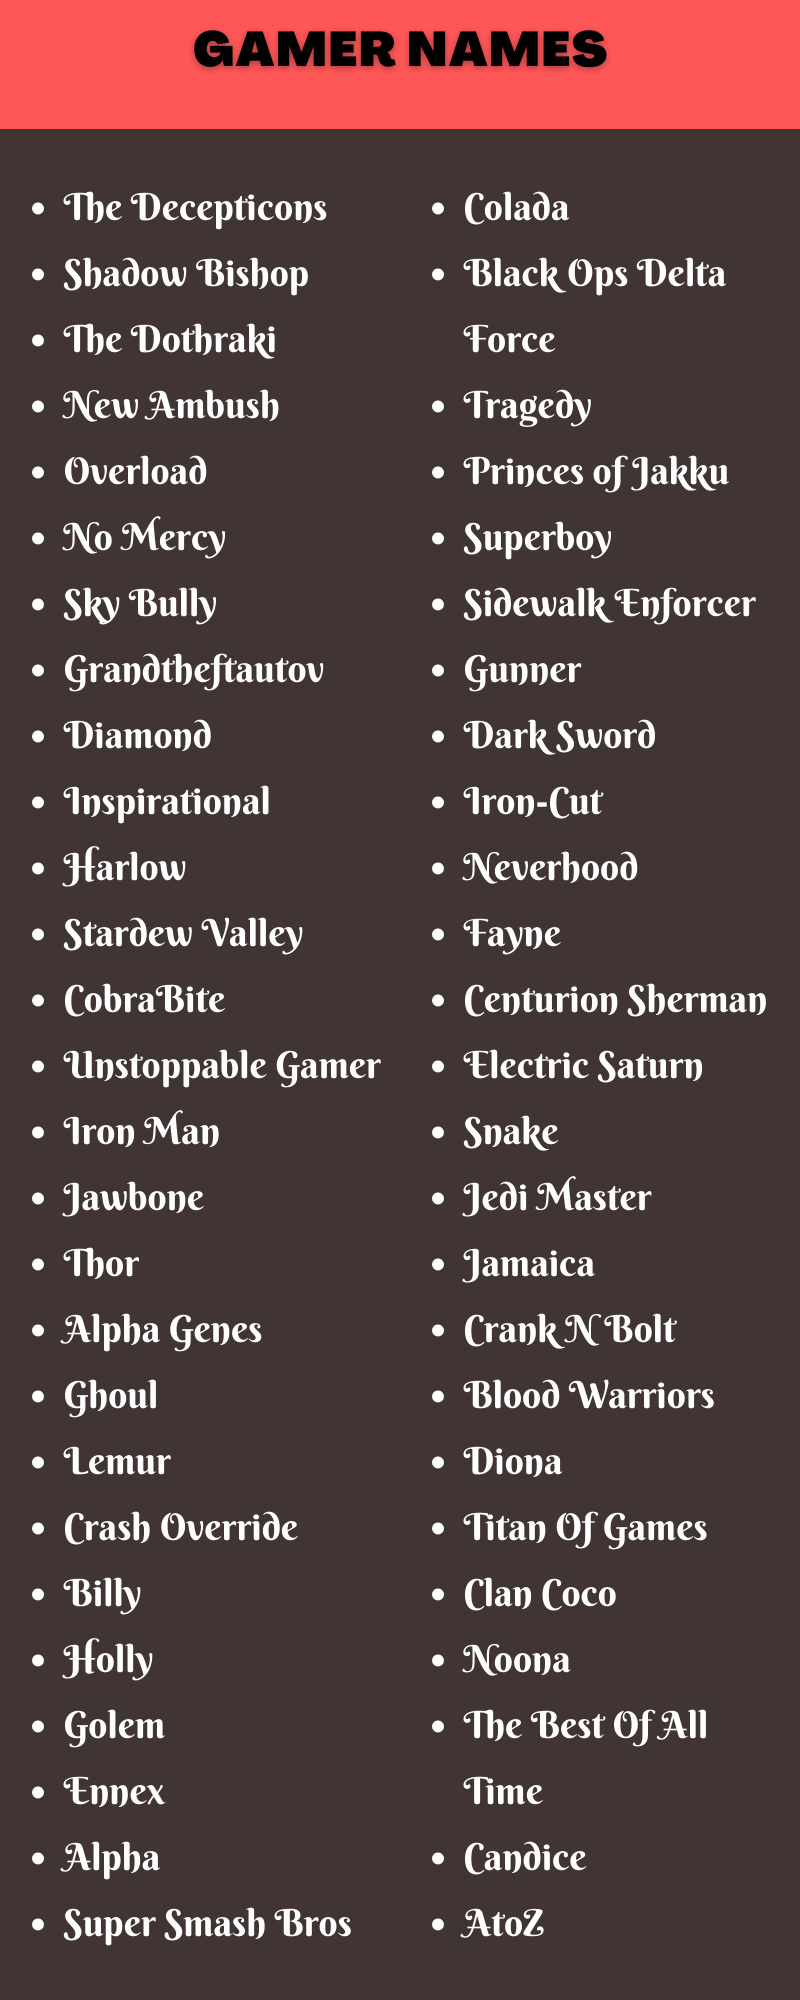 400 Cool Gamer Names Ideas and Suggestions